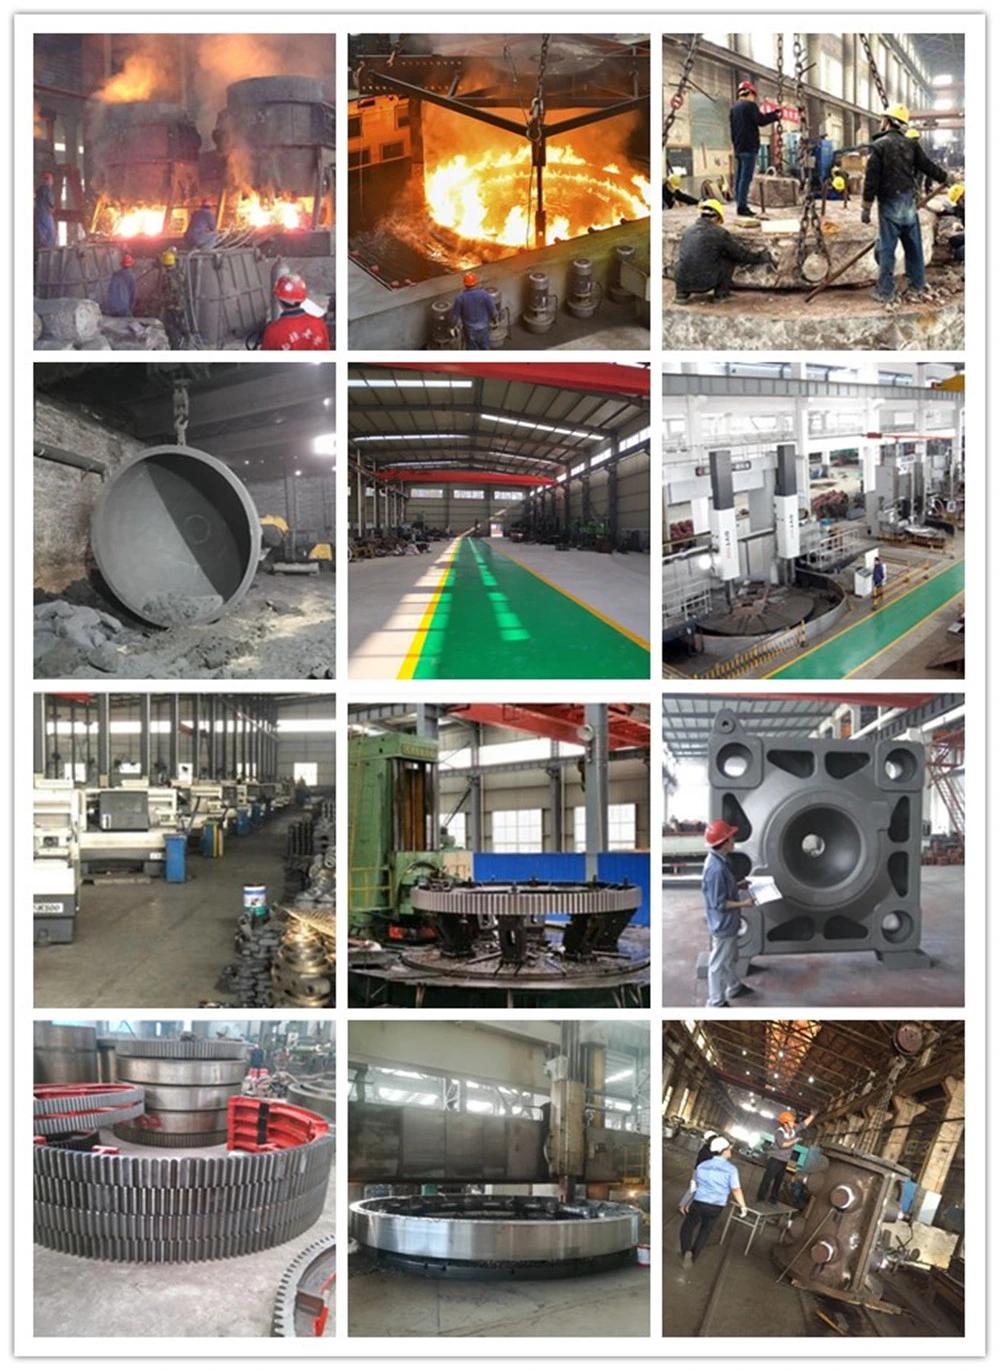 Metal Foundry Steel Gray / Grey / Ductile Cast Iron Aluminum Sand Iron Casting